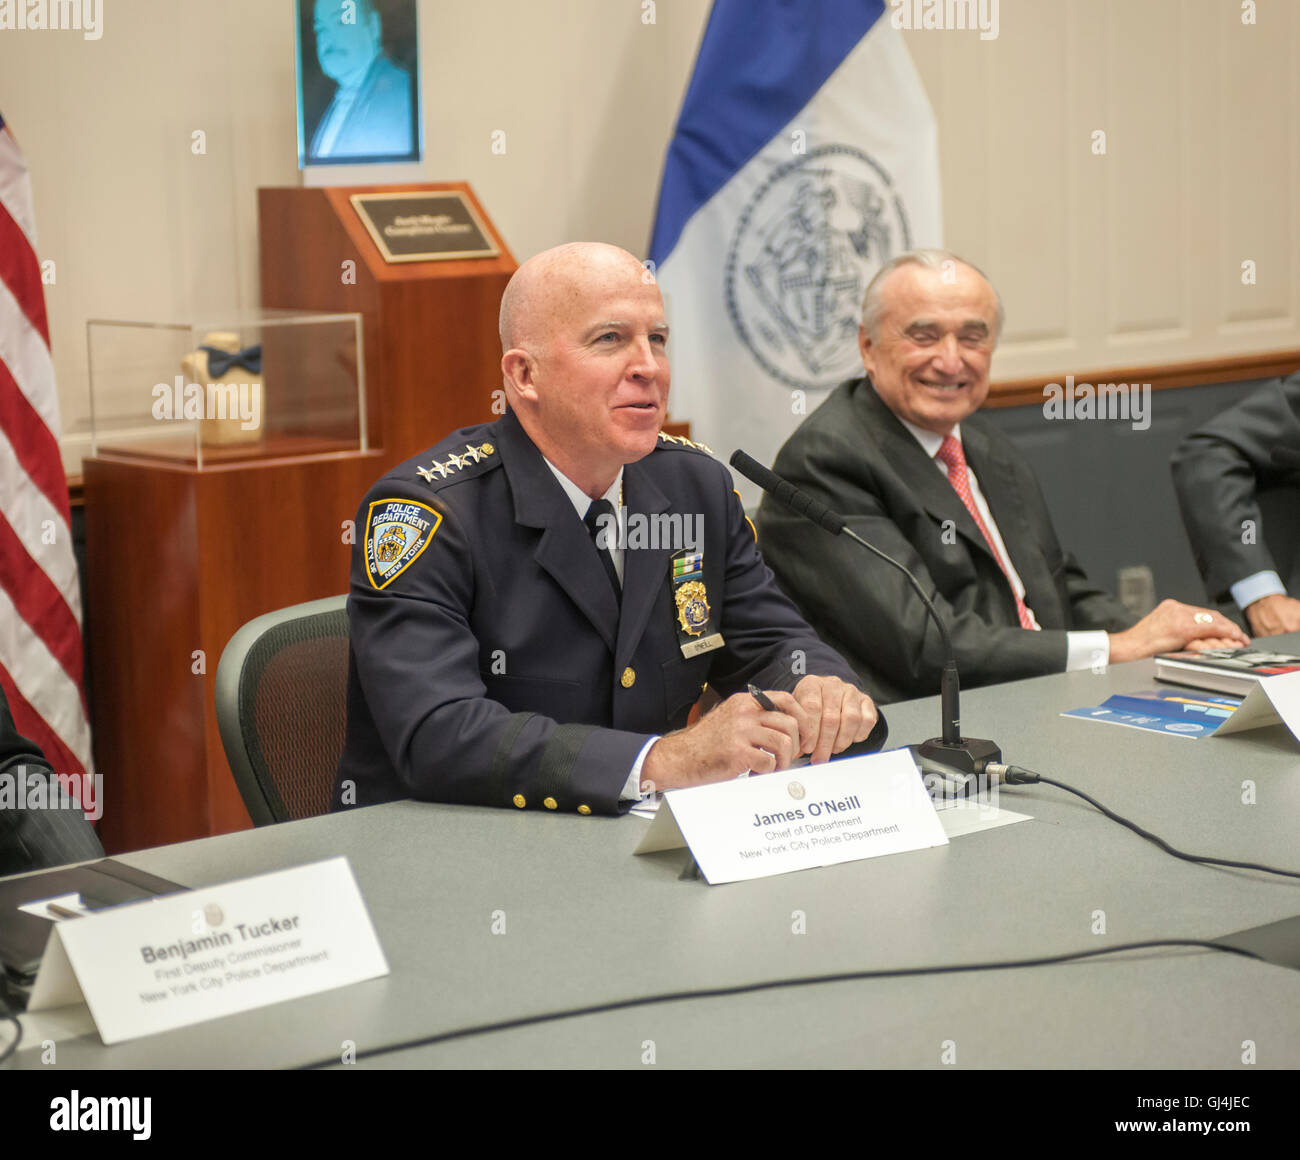 NYPD Commissioner William Bratton, right, and Chief of Department Jimmy O'Neill report to the press in the Jack Maples Compstat Room at One Police Plaza in New York on Thursday, August 4, 2016. The officials answered police related questions from the press as well as briefing the media on the ongoing decrease in violent crime in the city. O'Neill is to take over as commissioner in September when Bratton leaves. (© Richard B. Levine) Stock Photo